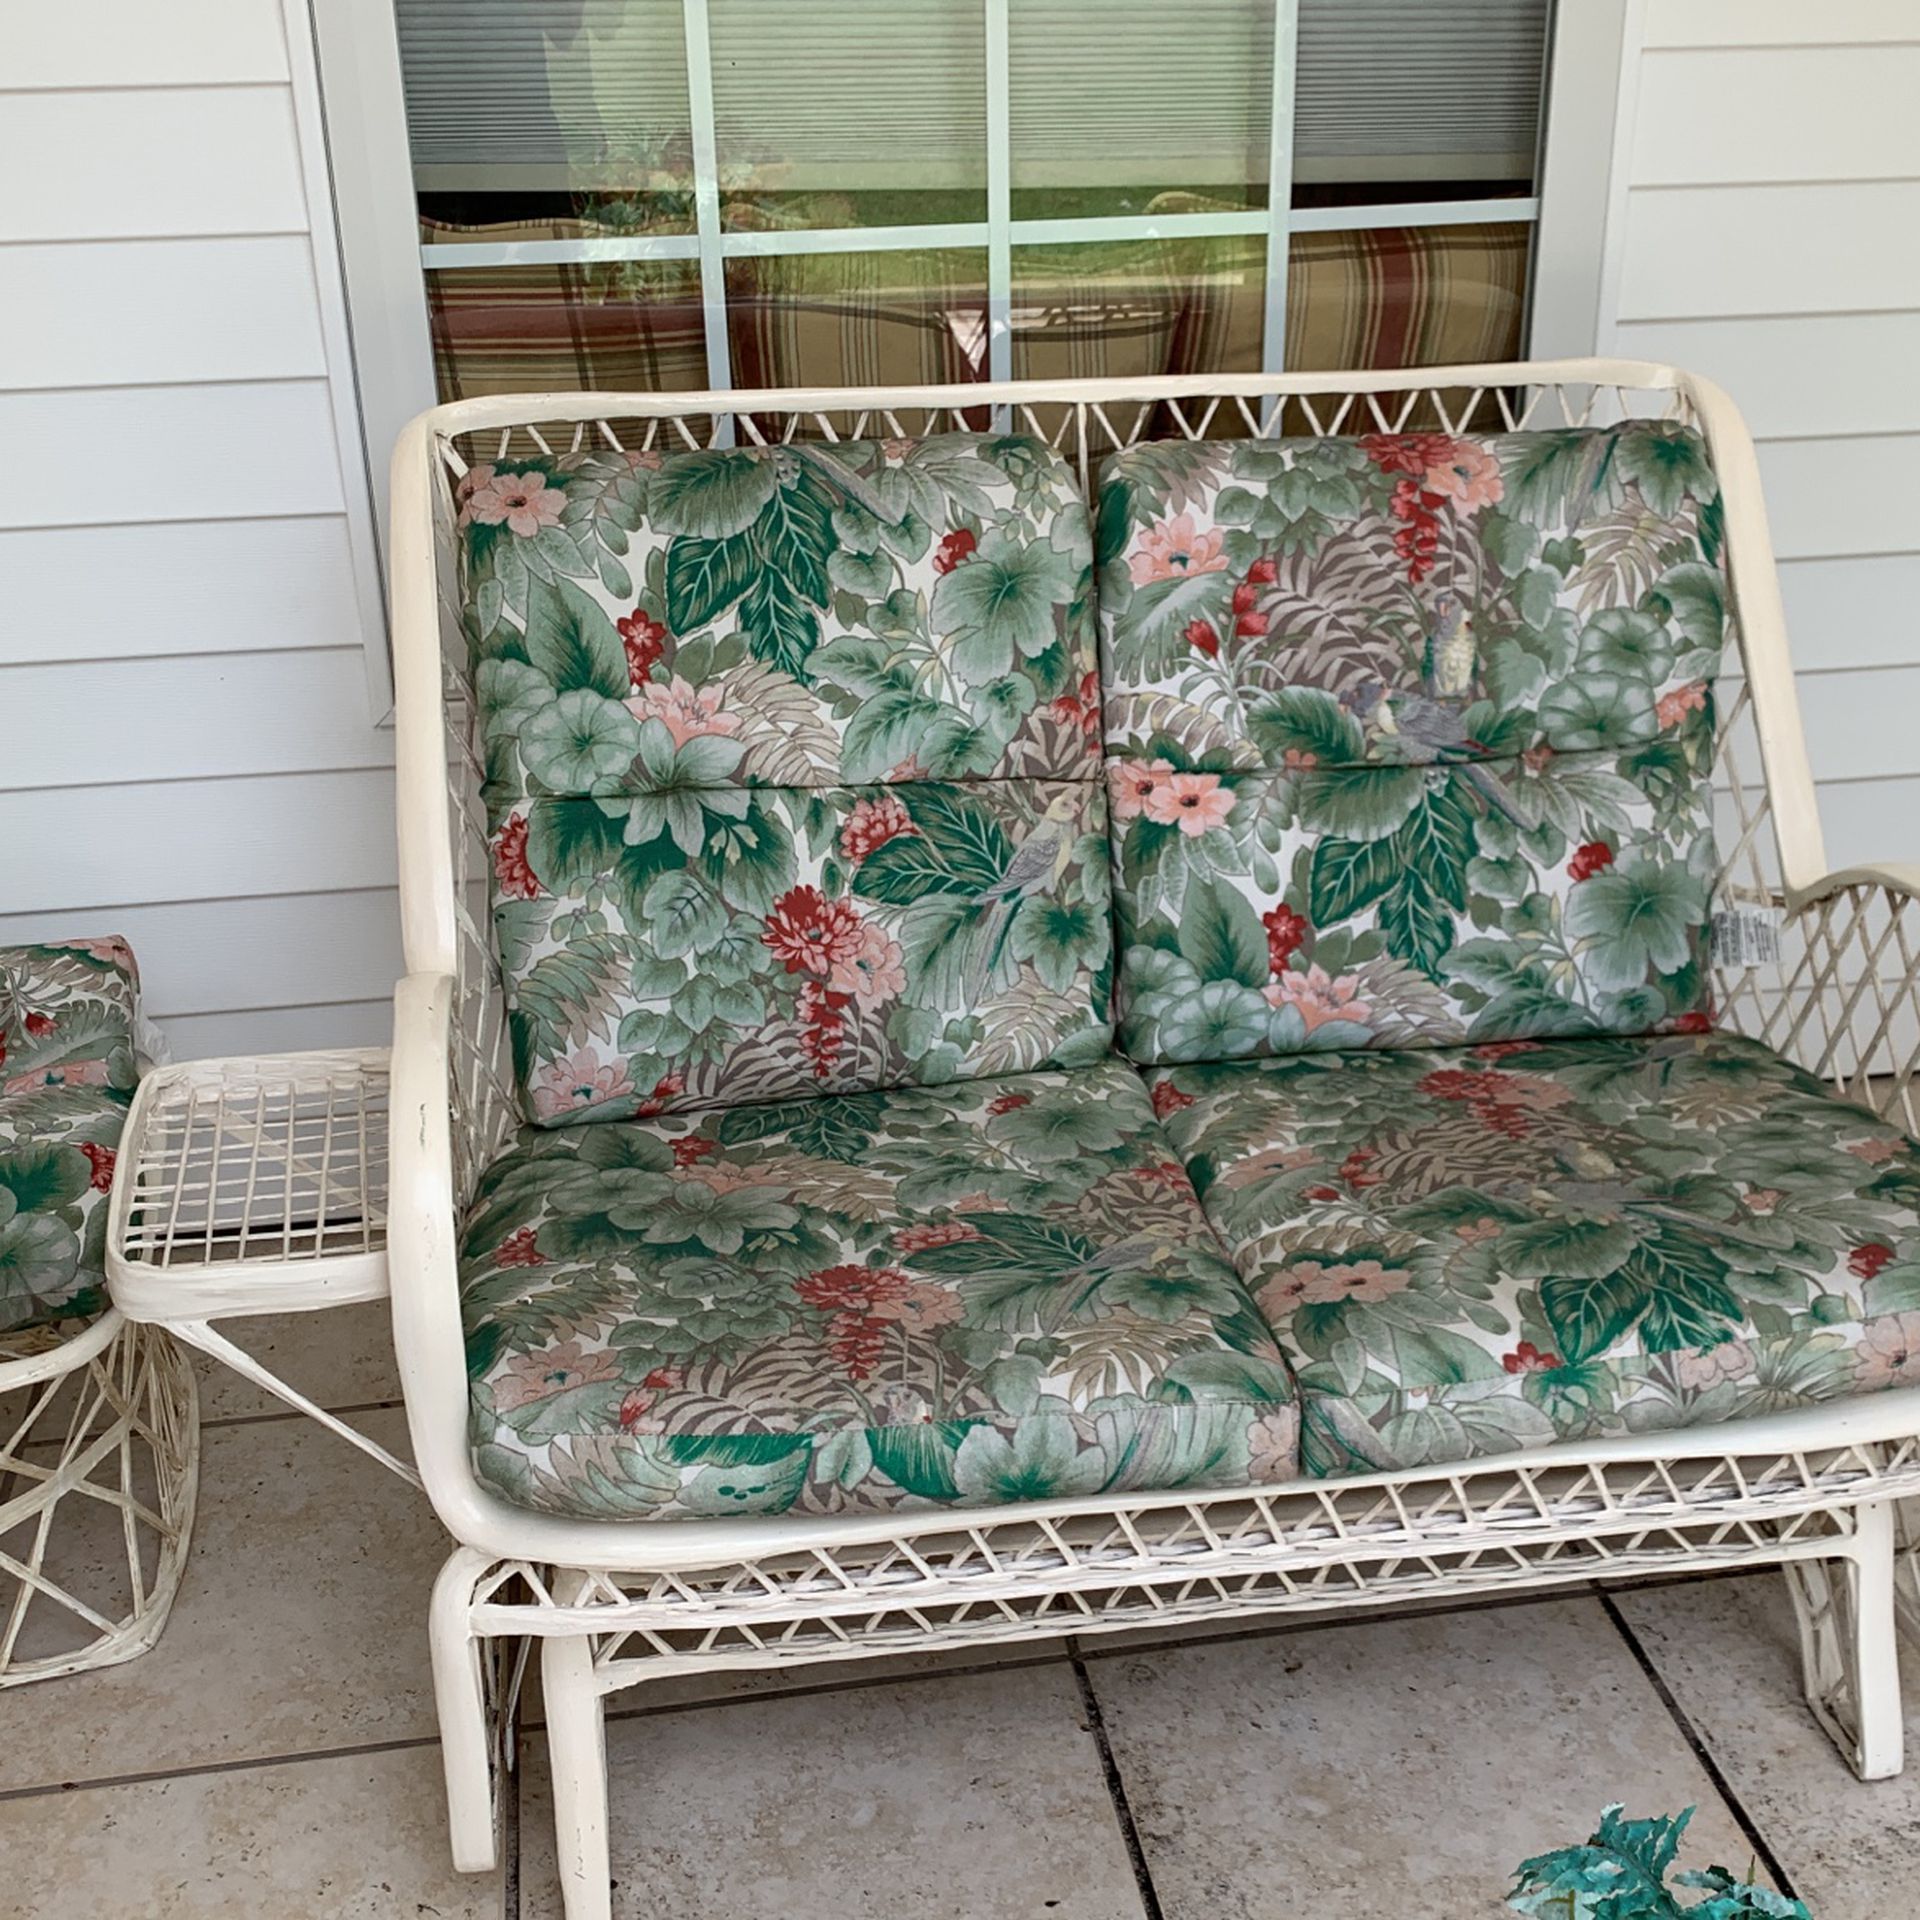 Lawn Furniture 1  Loveseat Glider, 1 Glider Chair ,3 Foot Oval Table, 1 Ottoman, 